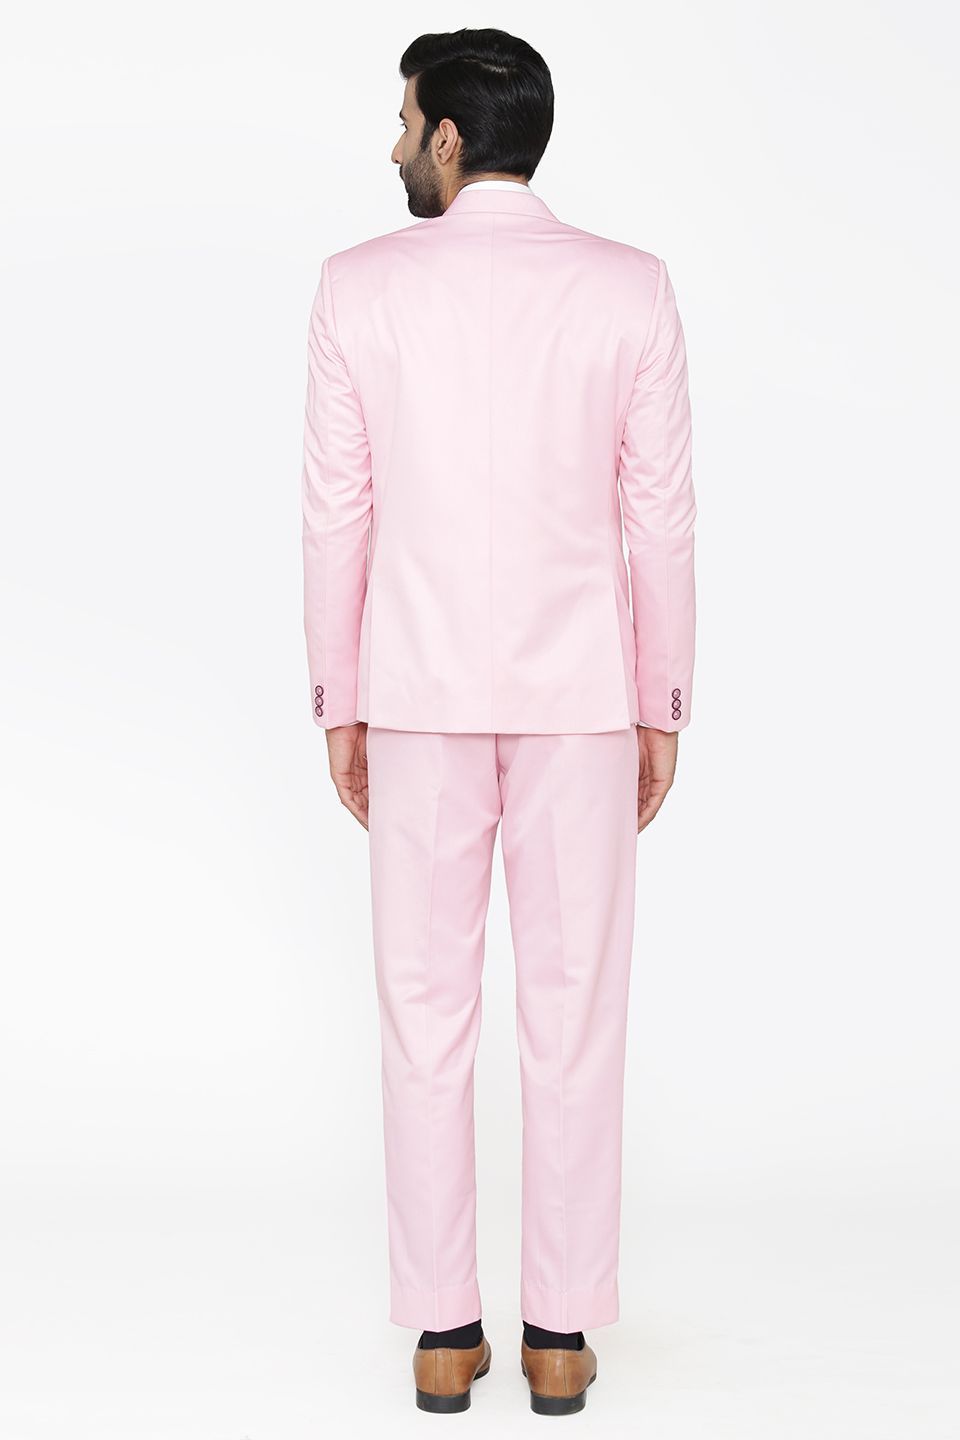 Wintage Men's Polyester Cotton and Evening 3 Pc Suit : Pink